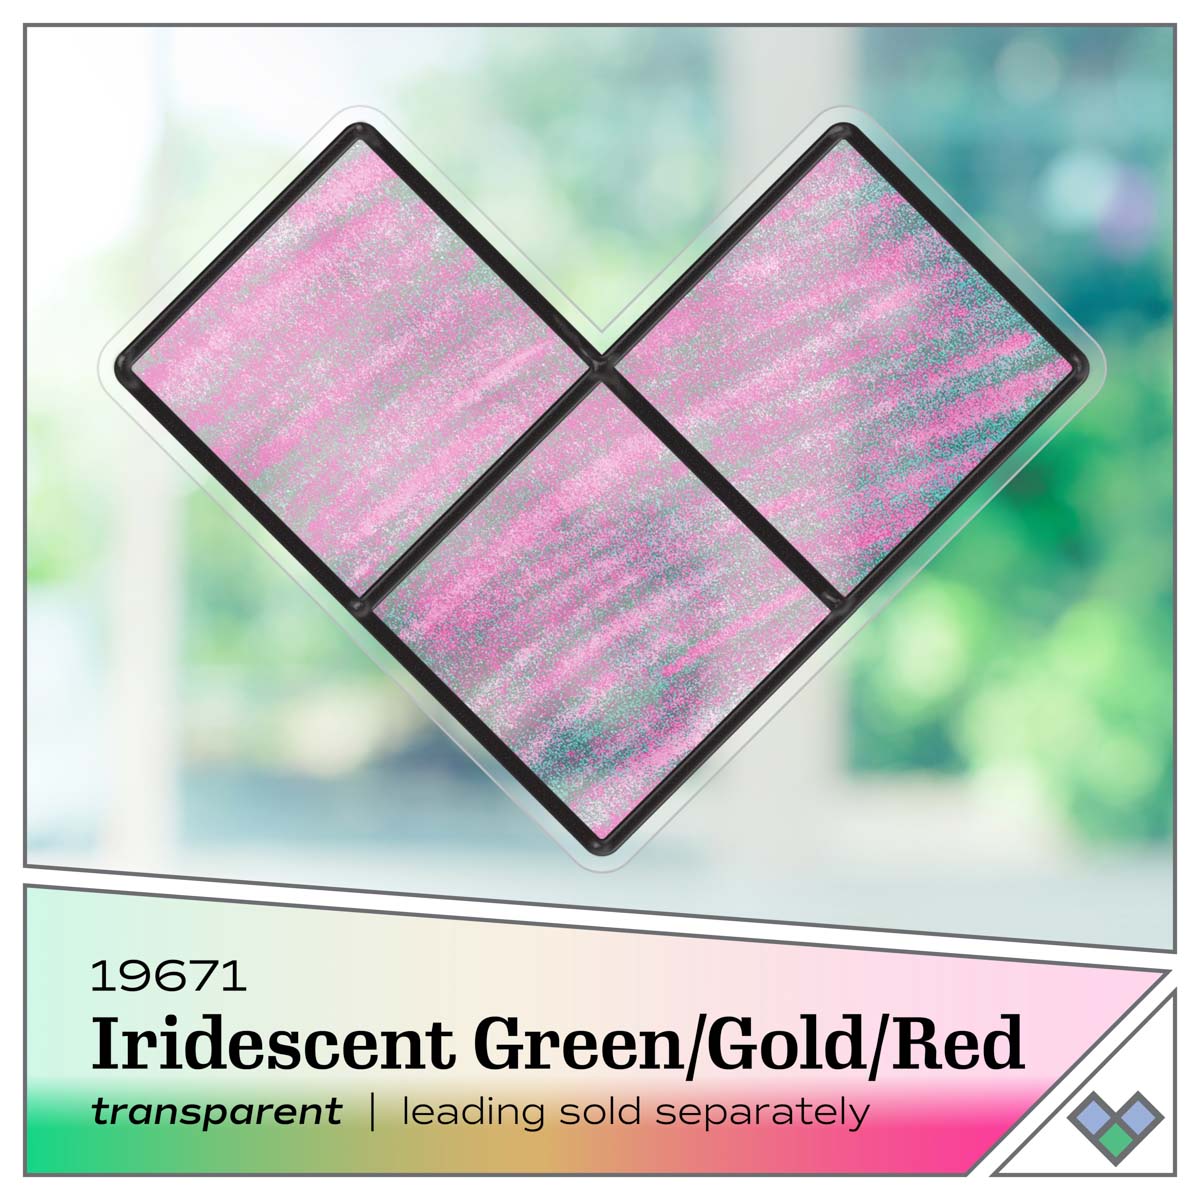 Gallery Glass ® Iridescent™ Stained Glass Effect Paint - Green-Gold-Red, 2 oz. - 19671